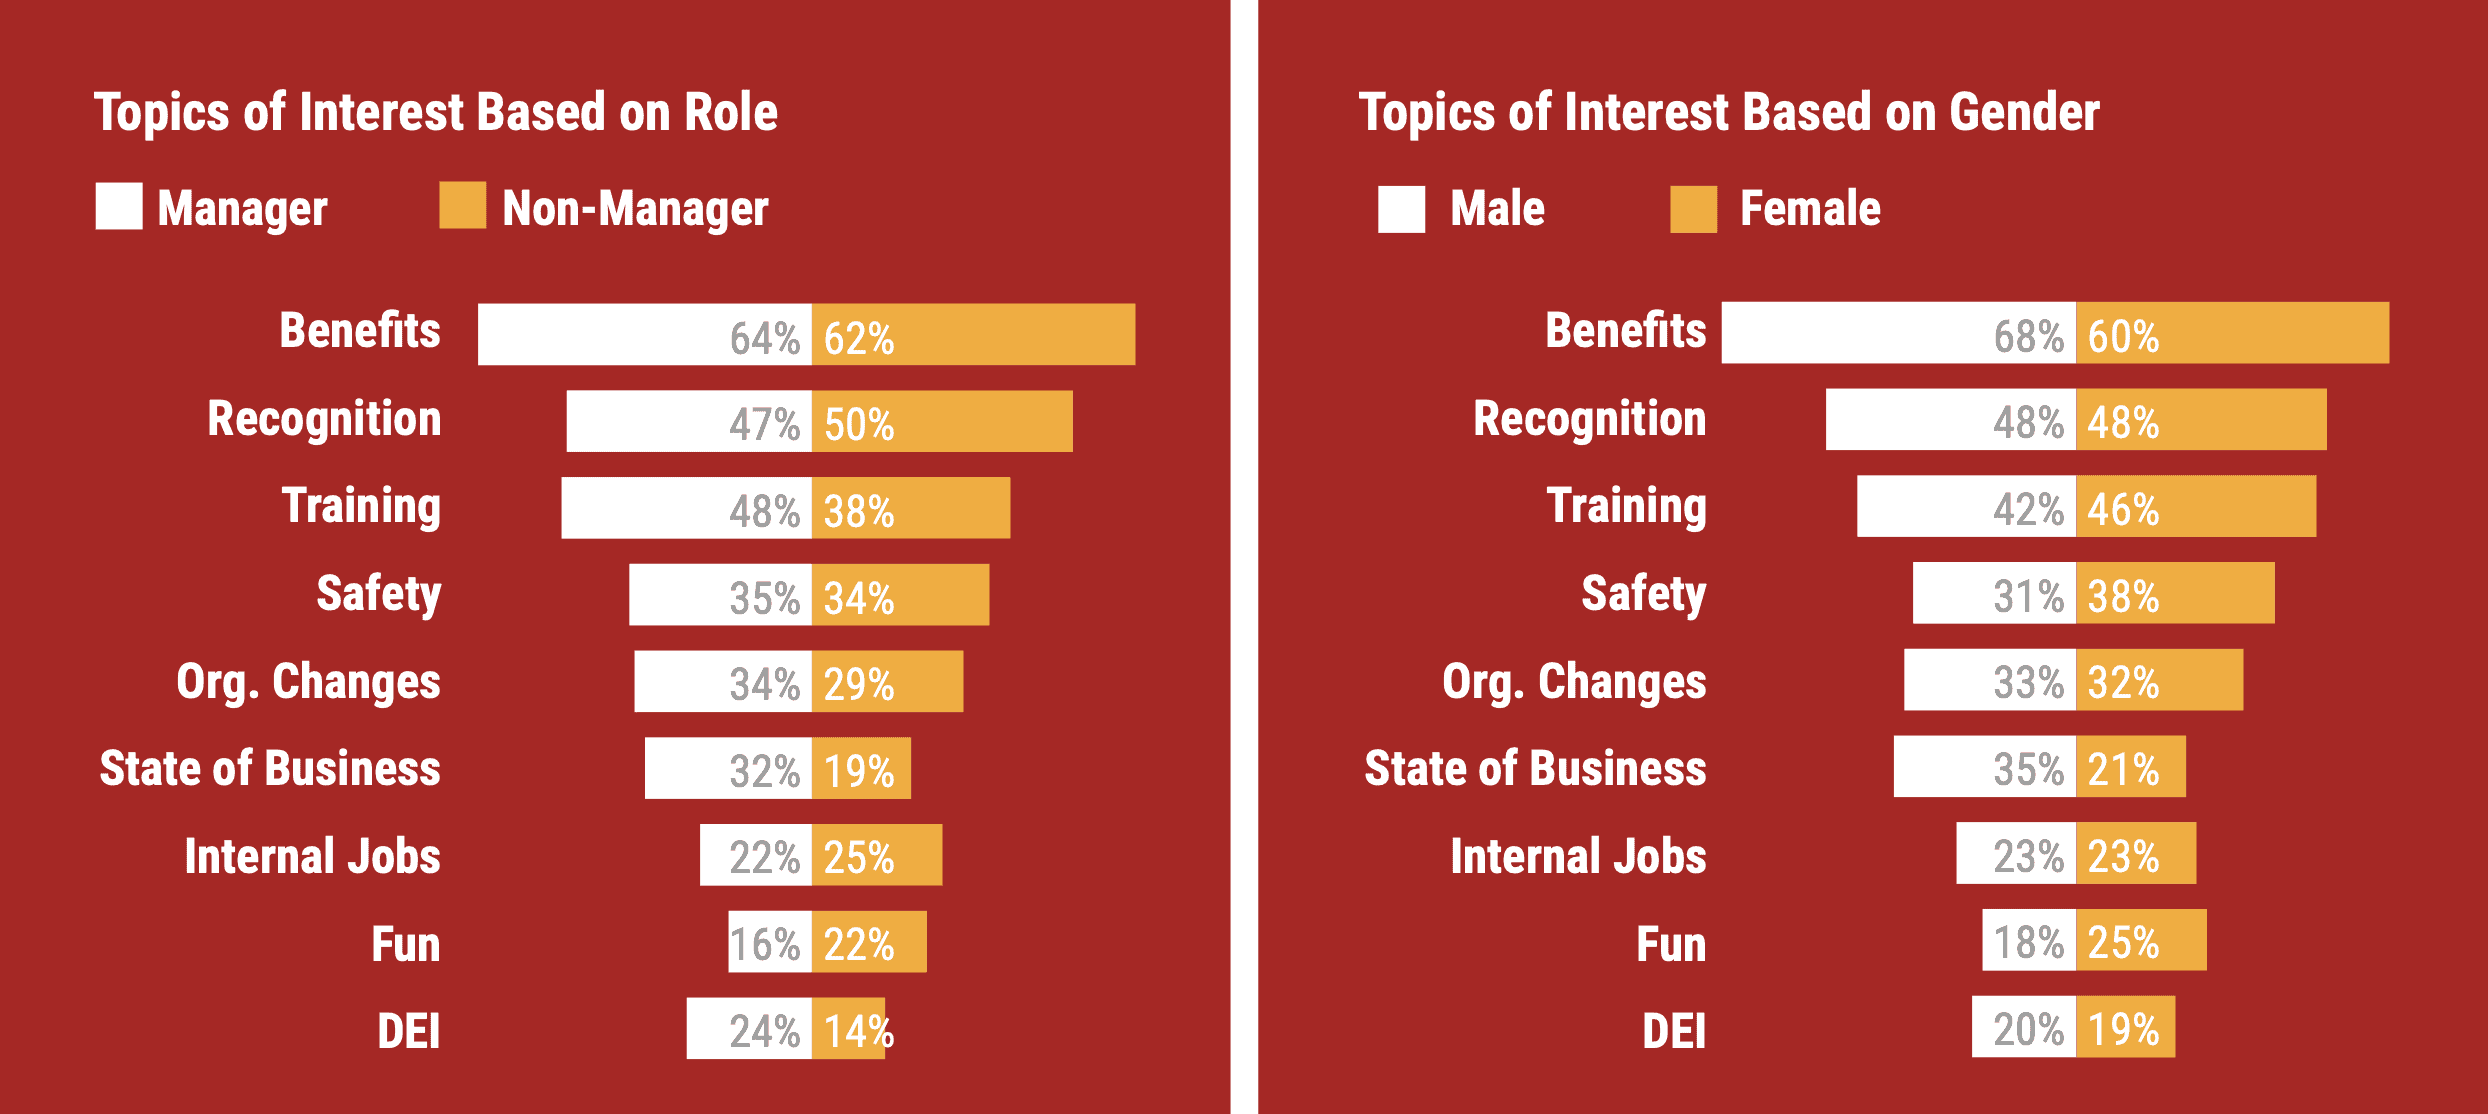 topics of interest broken down by role and gender.